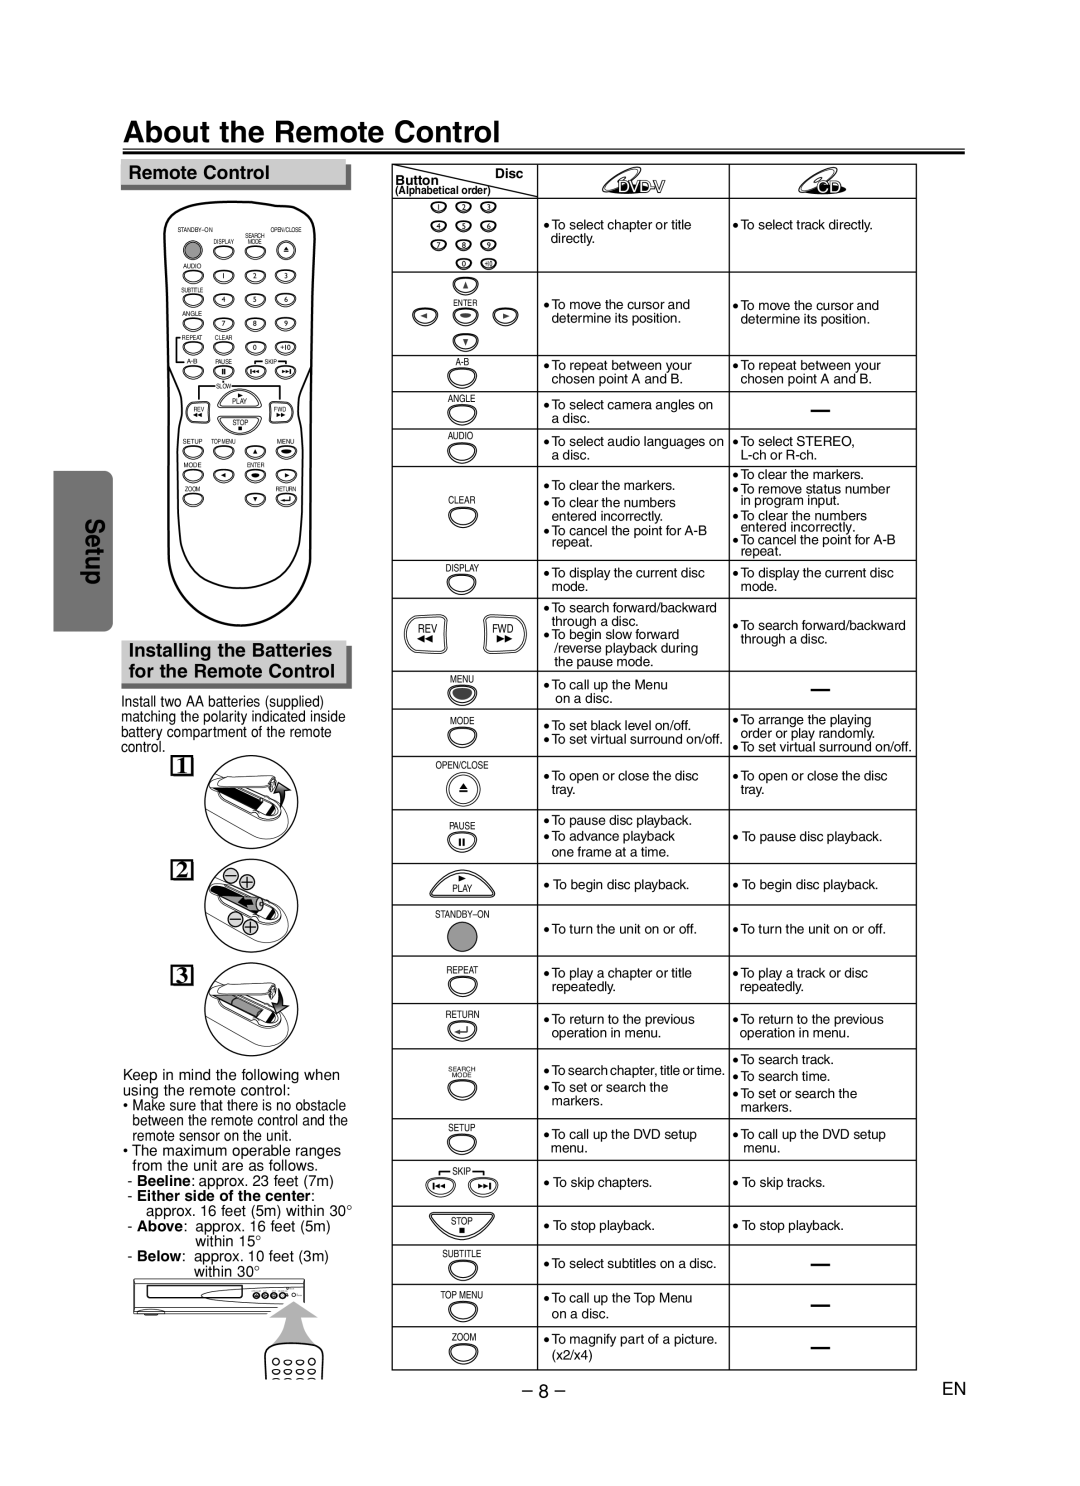 FUNAI MSD125 About the Remote Control, Setup, Installing the Batteries for the Remote Control, Dvd-V, Button, Disc 